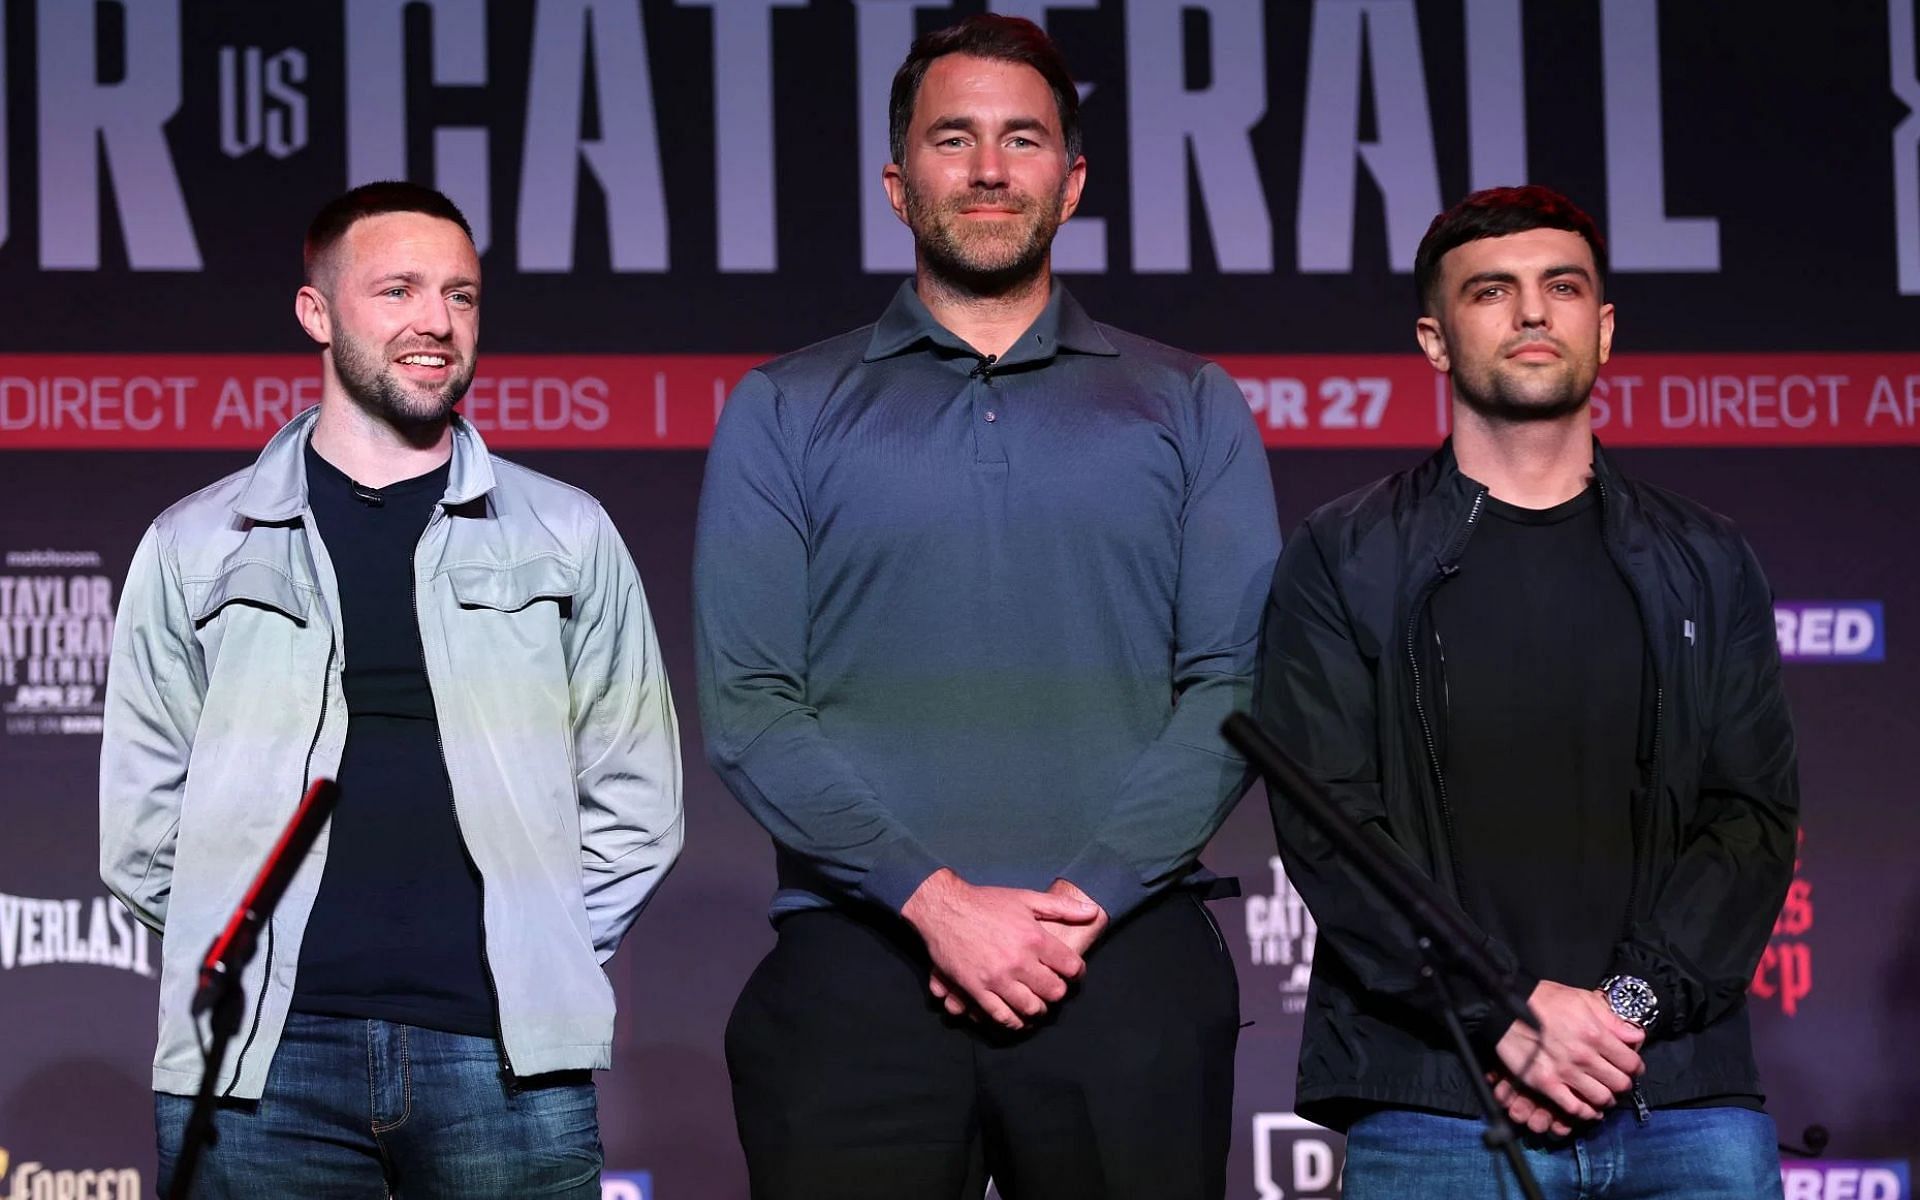 Eddie Hearn (middle) labels Josh Taylor (left) versus Jack Catterall (right) as the biggest British fight in 2024 [Image Courtesy: @GettyImages]